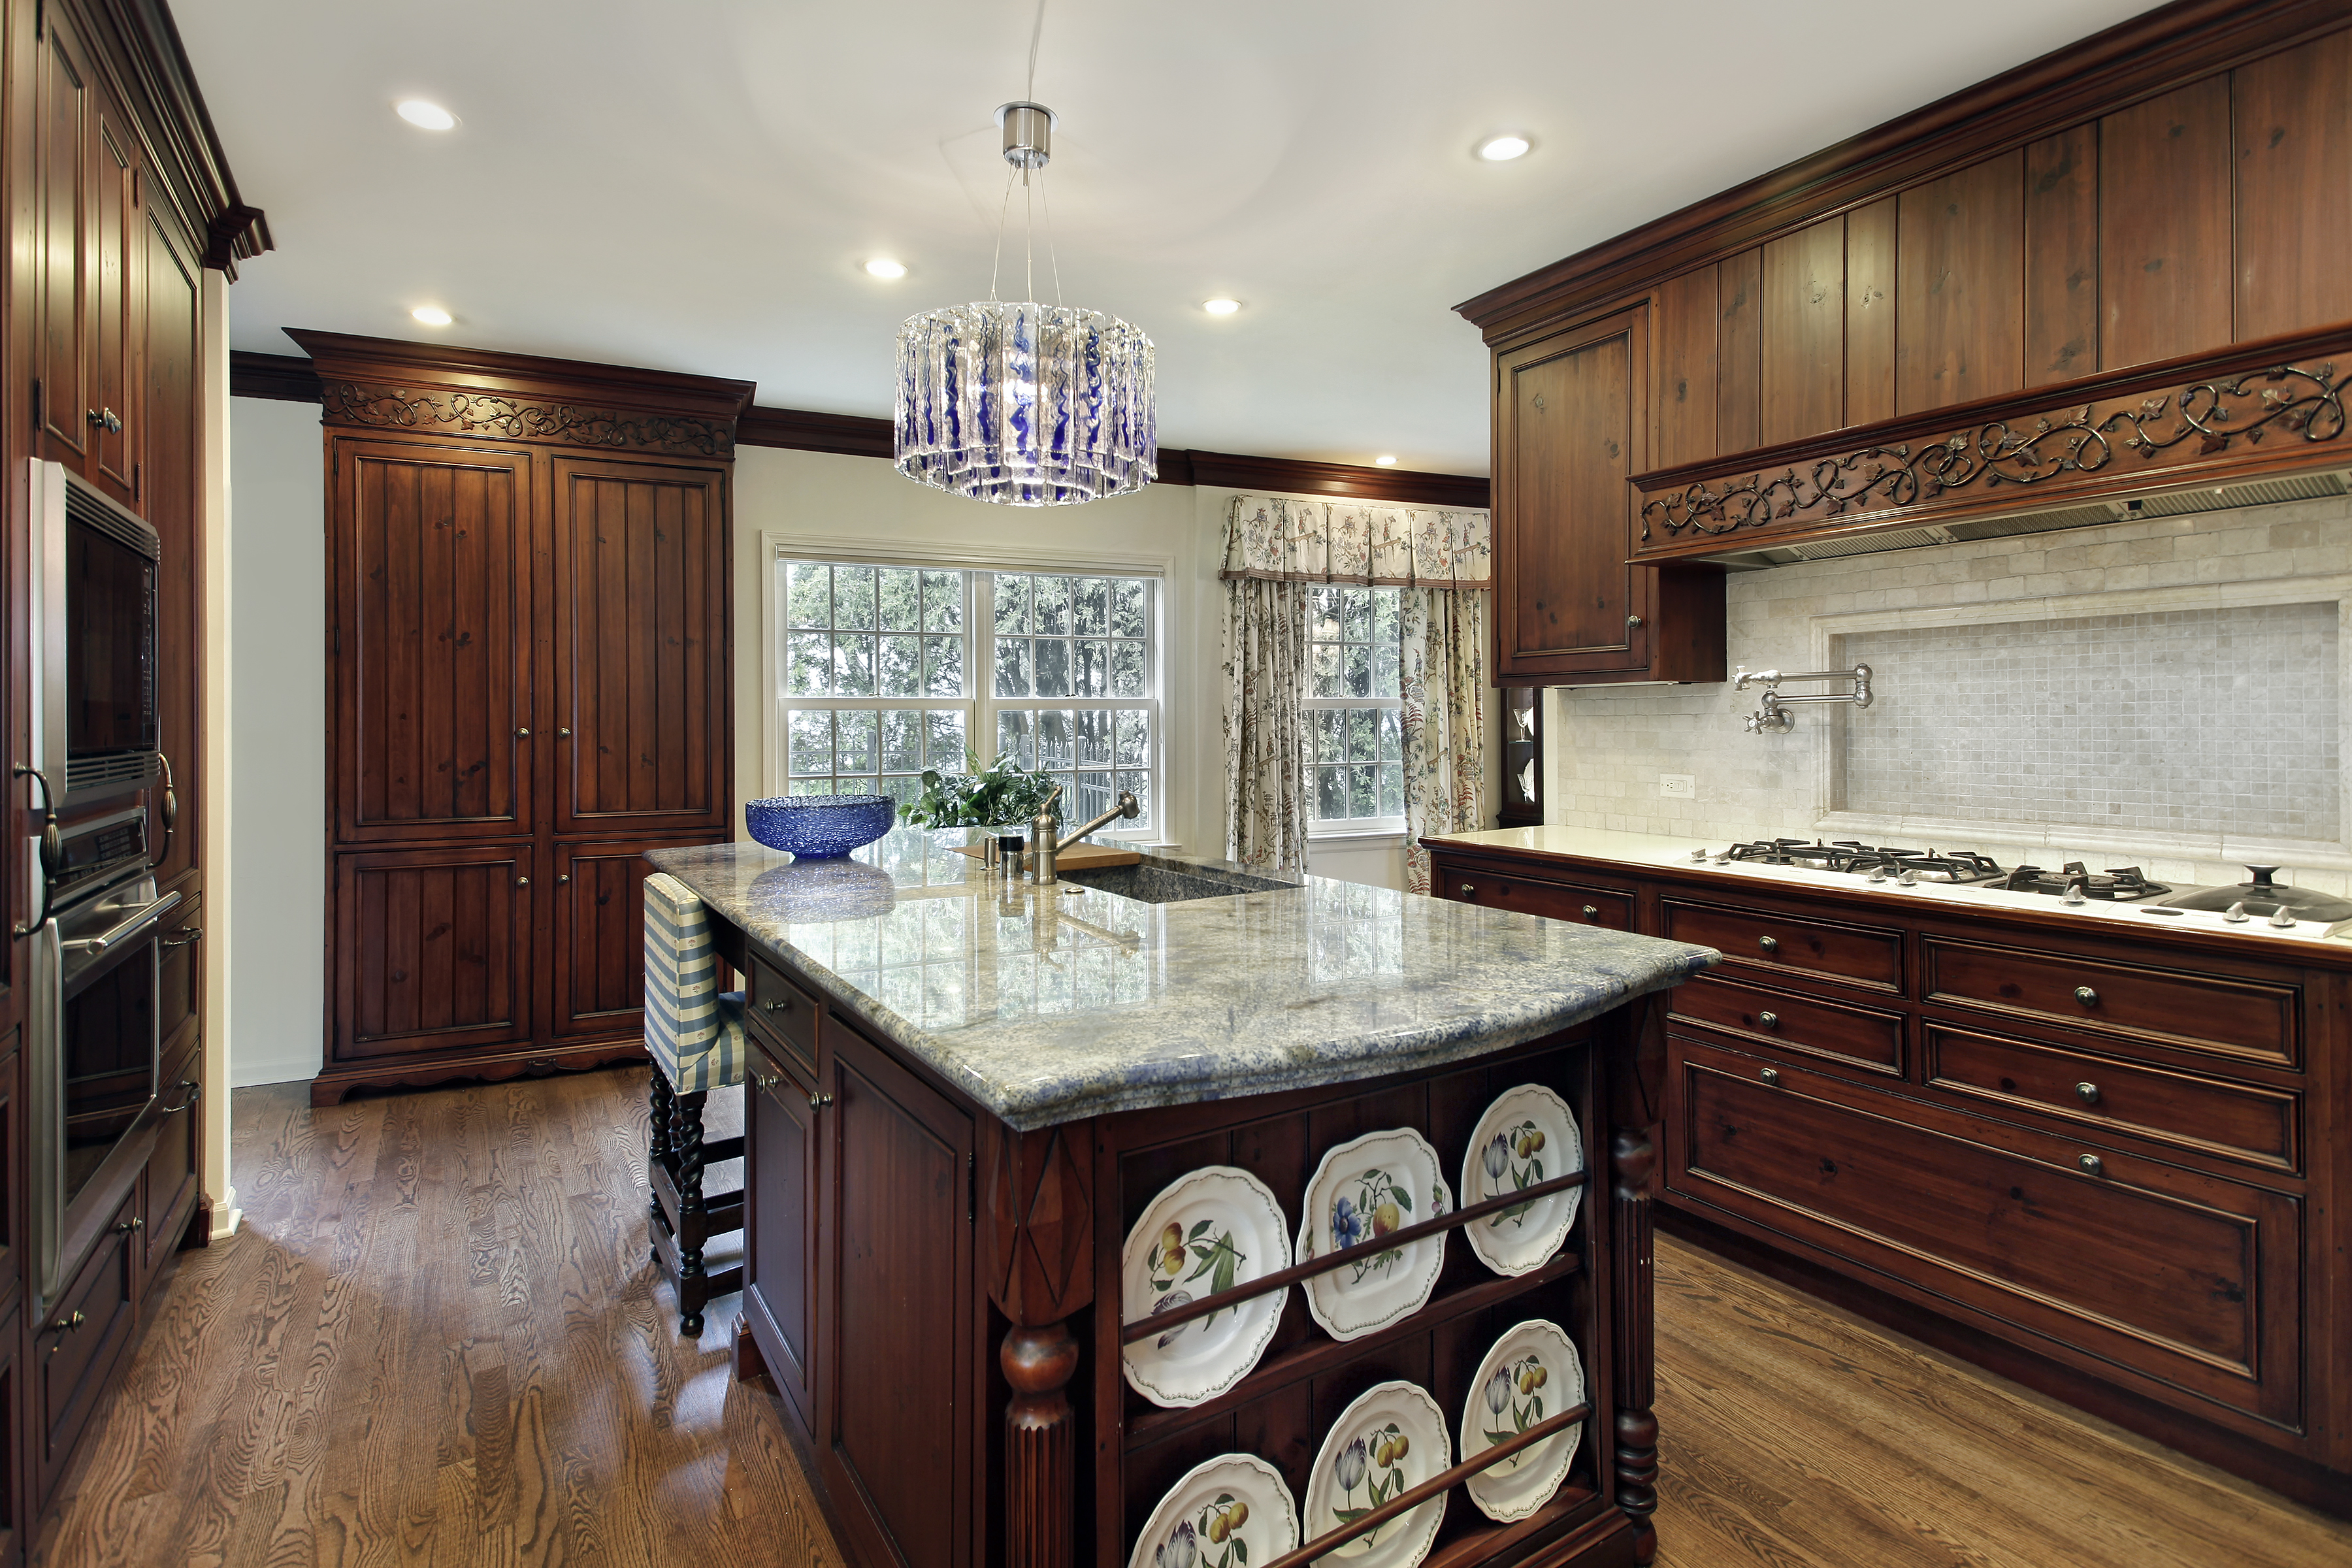 Top 6 Most Popular Kitchen Styles - Kitchen Cabinets and Granite